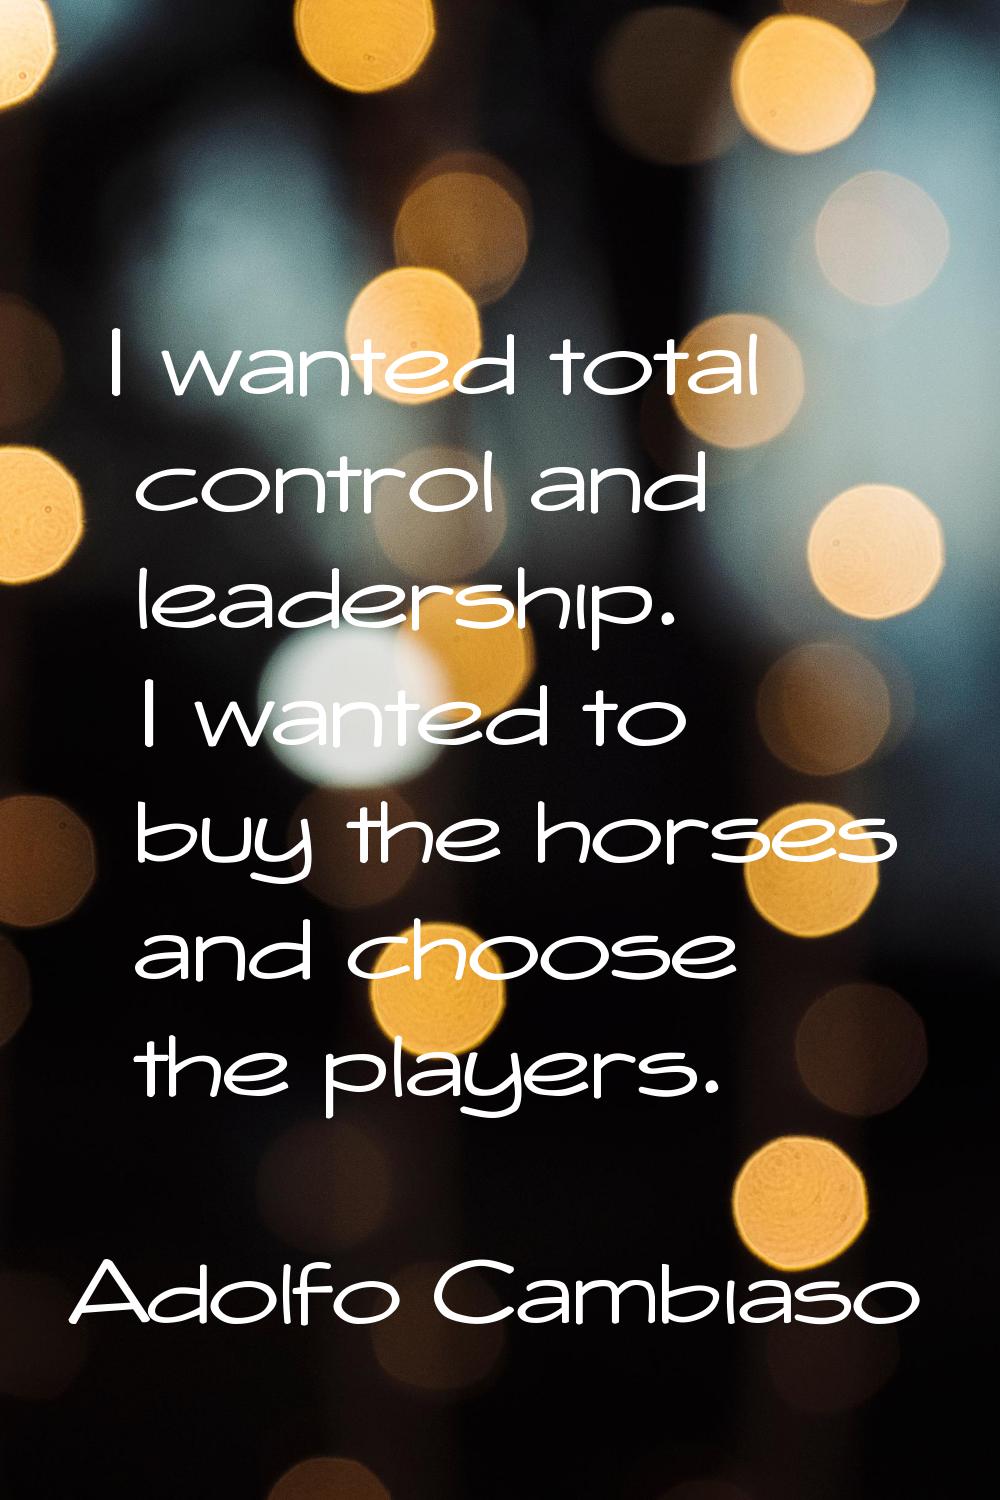 I wanted total control and leadership. I wanted to buy the horses and choose the players.